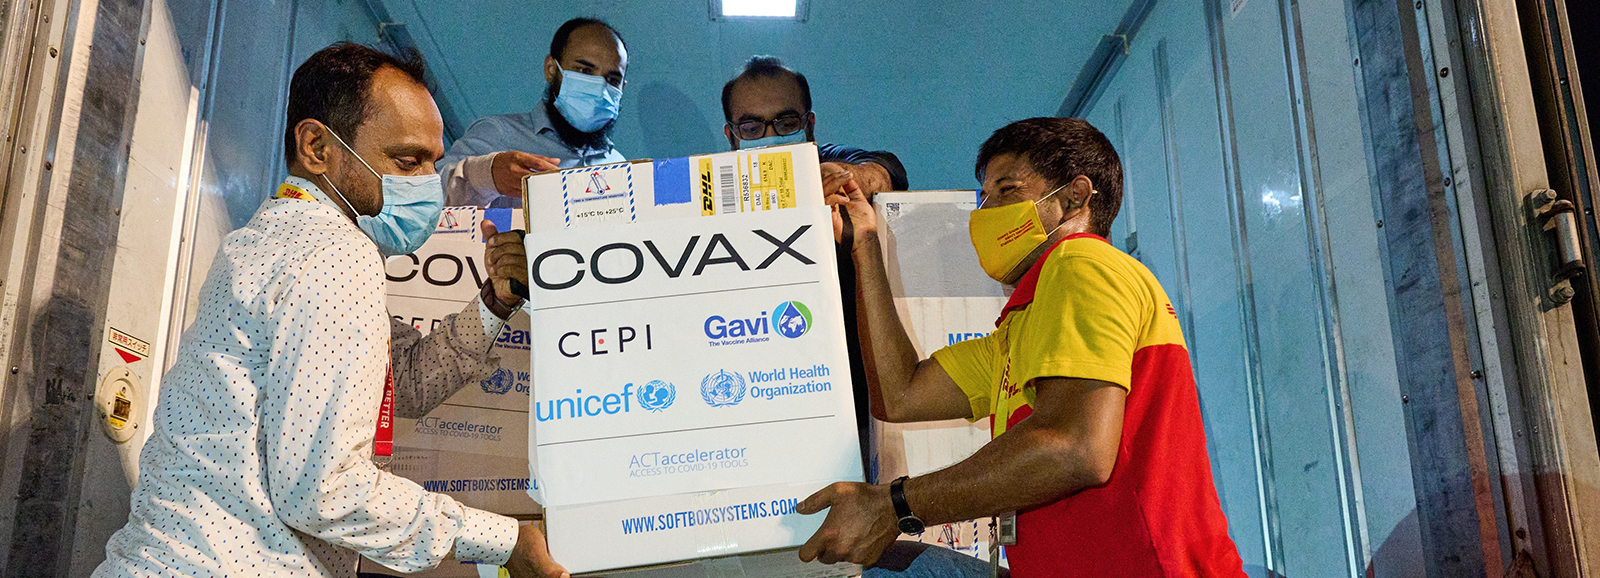 A group of men unload a box that says 'COVAX' from a truck.